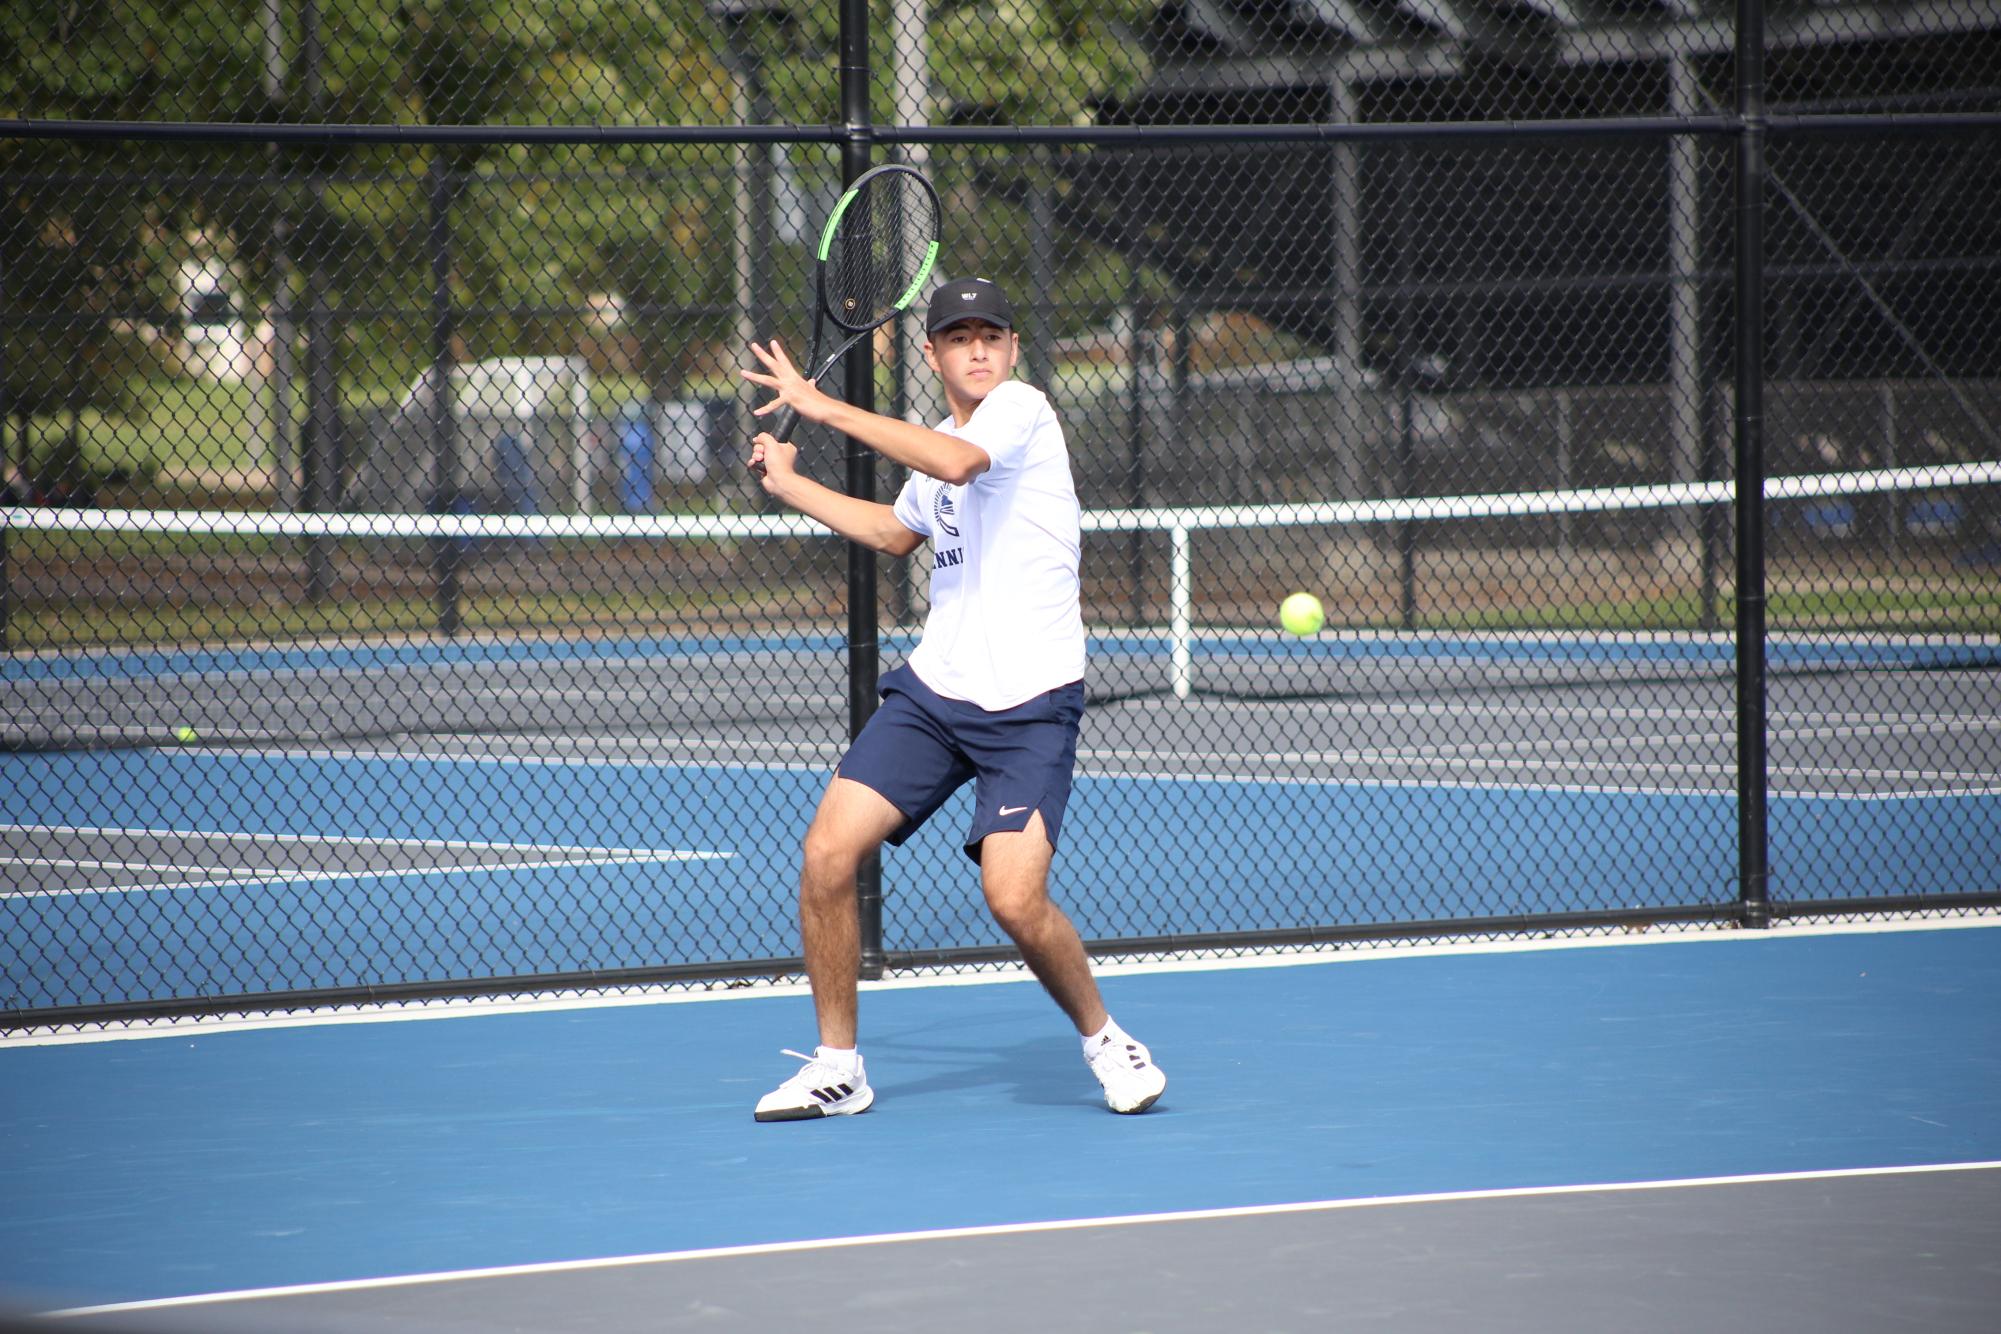 Getting ready to return a serve, Ismoil rears his racket back in preparation on Oct. 6.